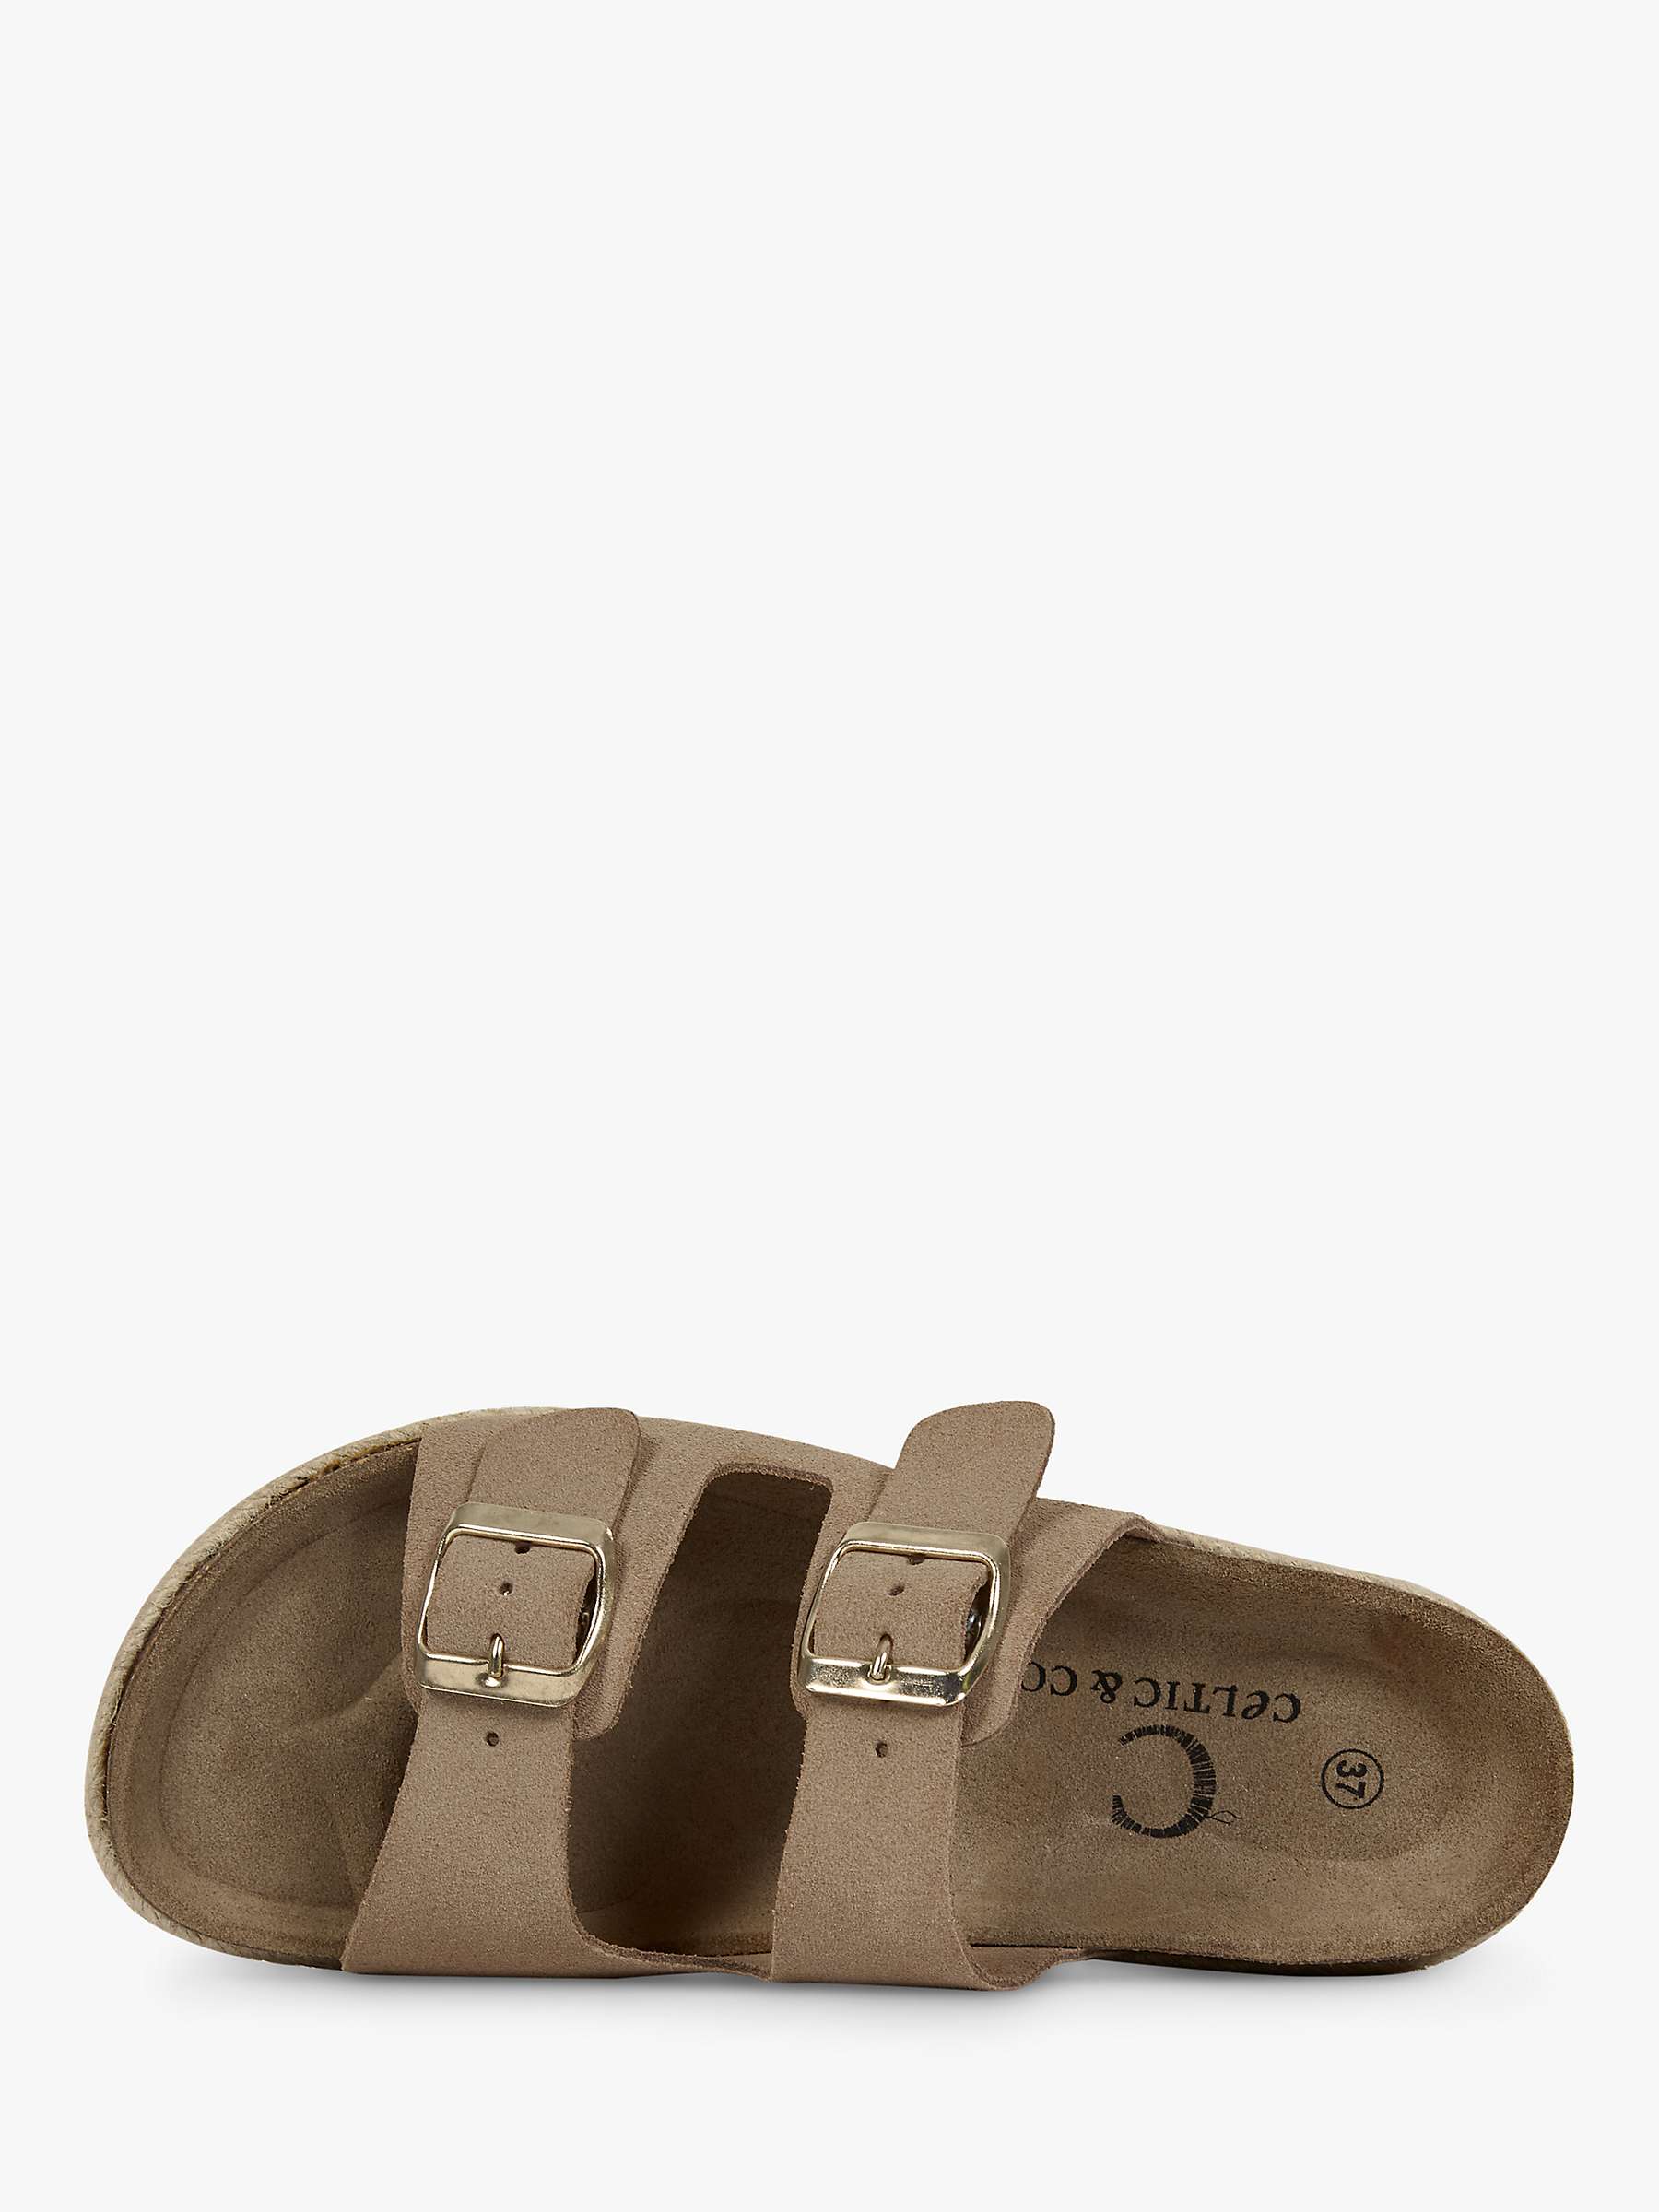 Buy Celtic & Co. Suede Double Buckle Footbed Sandals Online at johnlewis.com